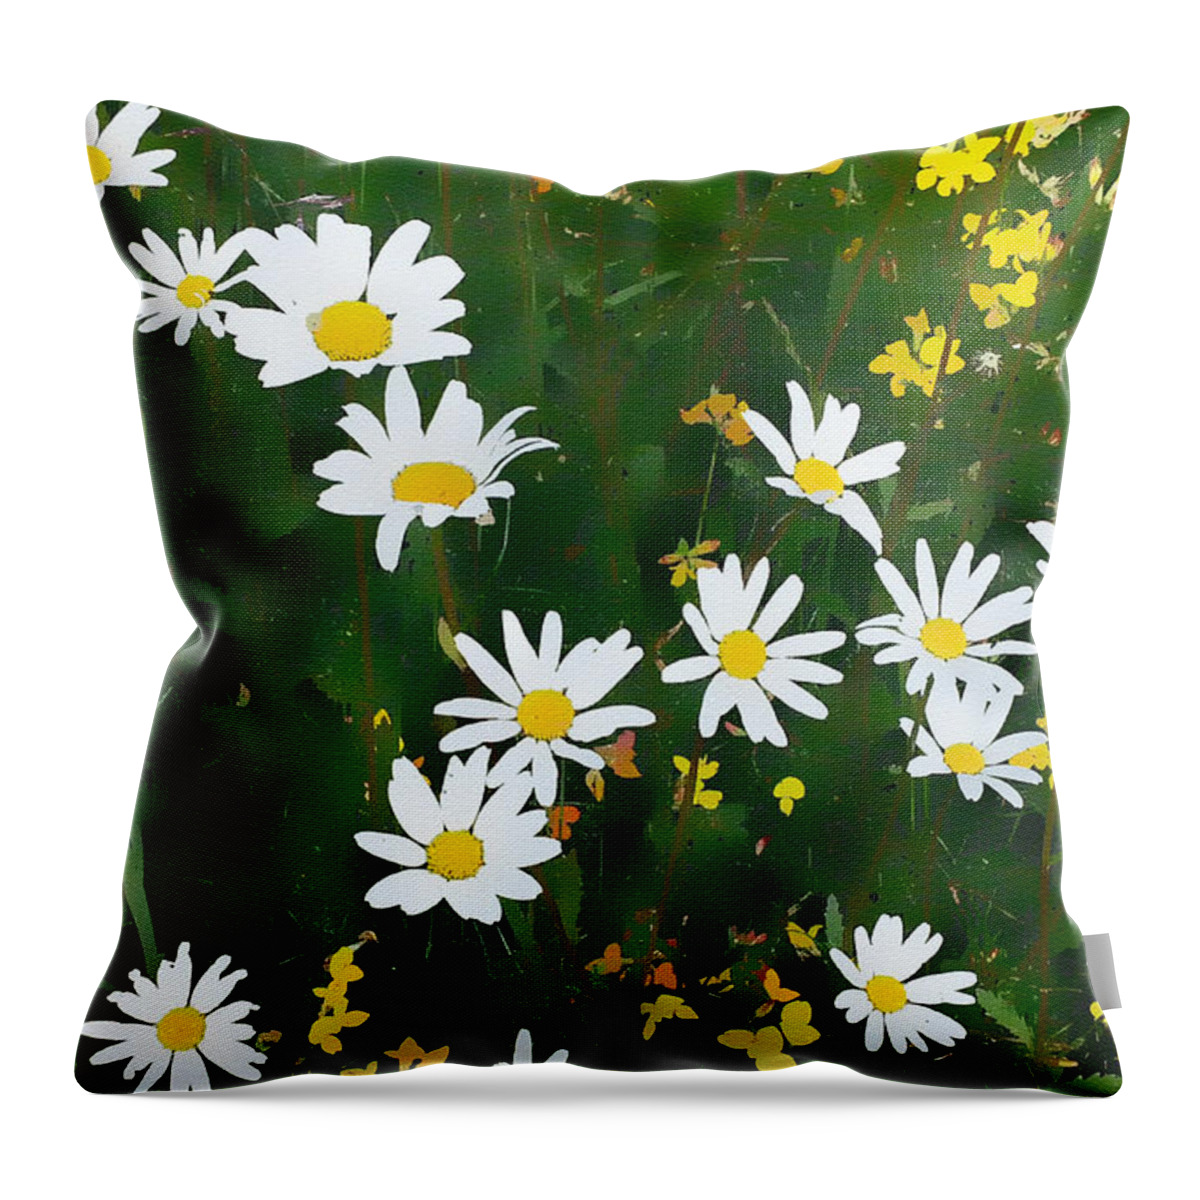 Daisies Throw Pillow featuring the digital art Summer Daisies by Julian Perry